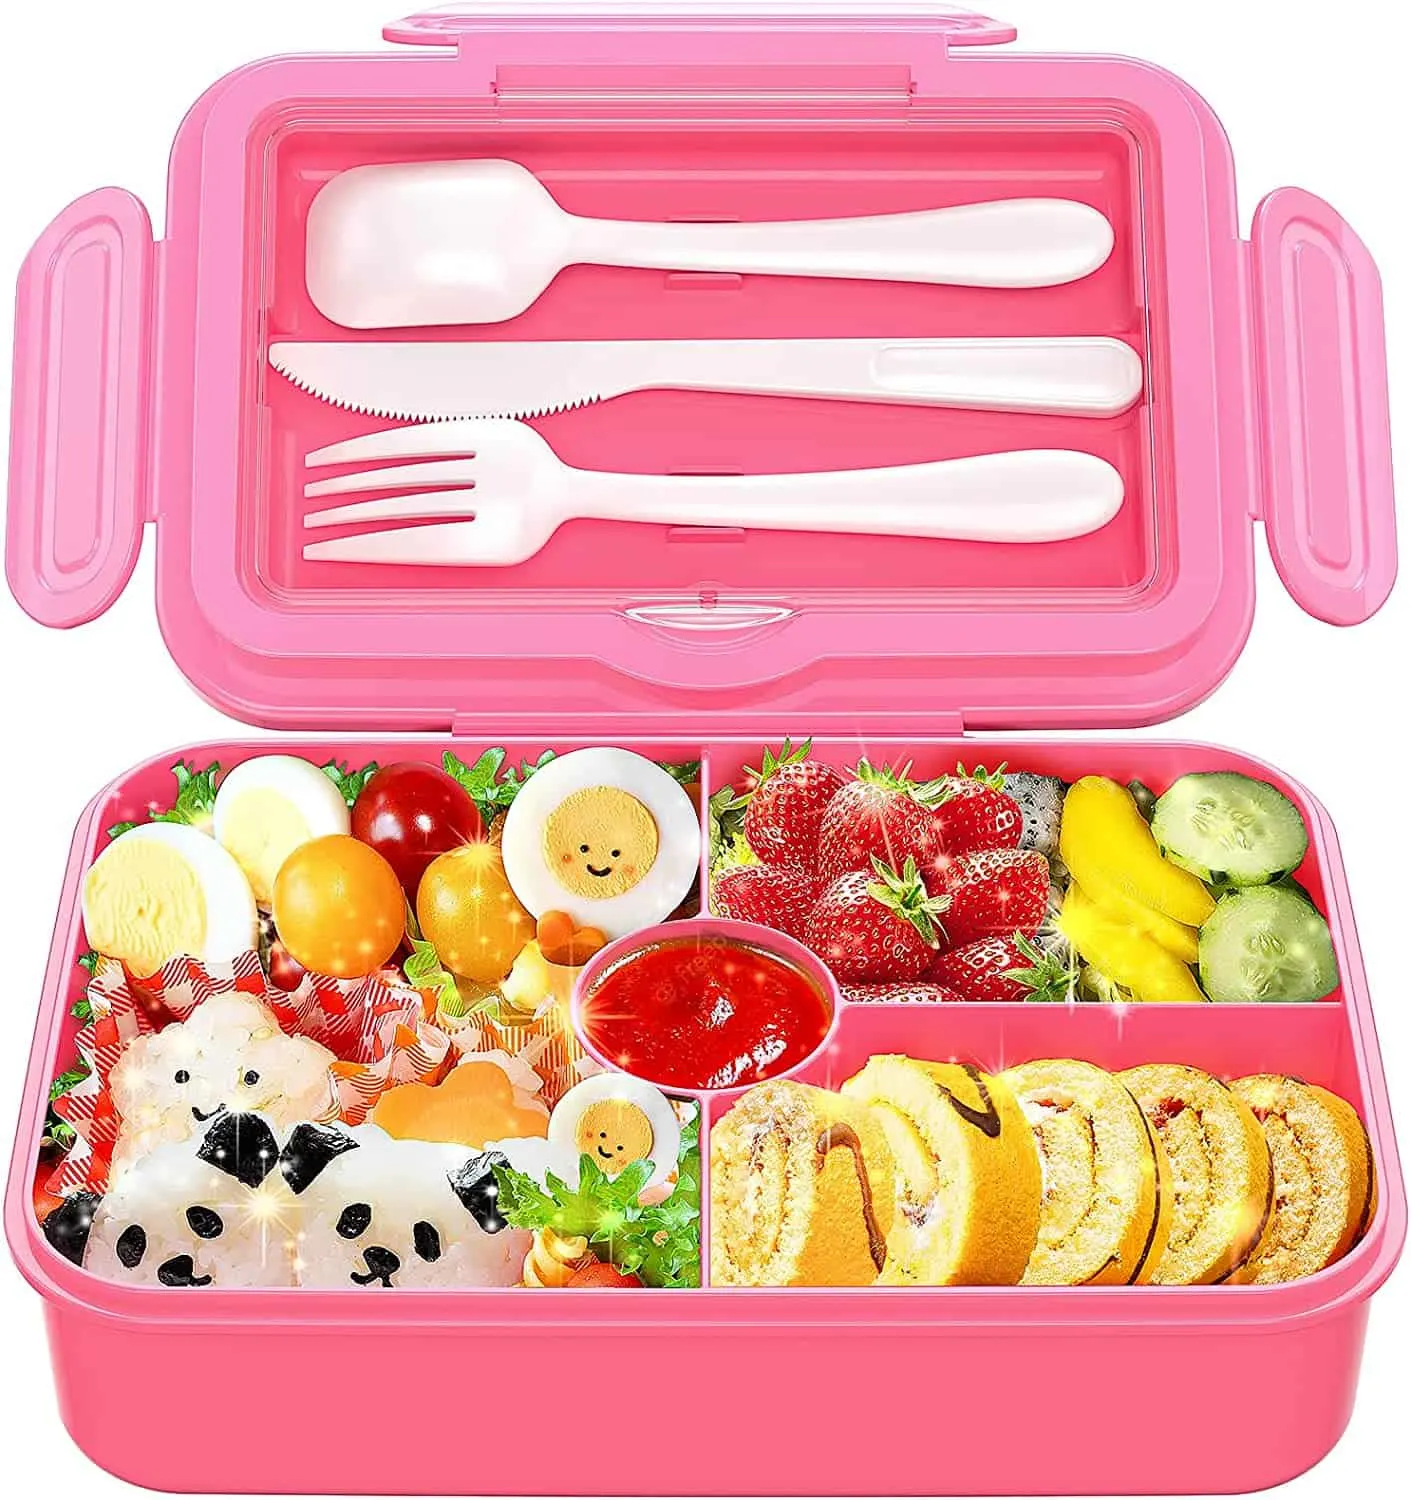 Section Bento Box Lunch Box Set Slim with Silicone Cups for Bento